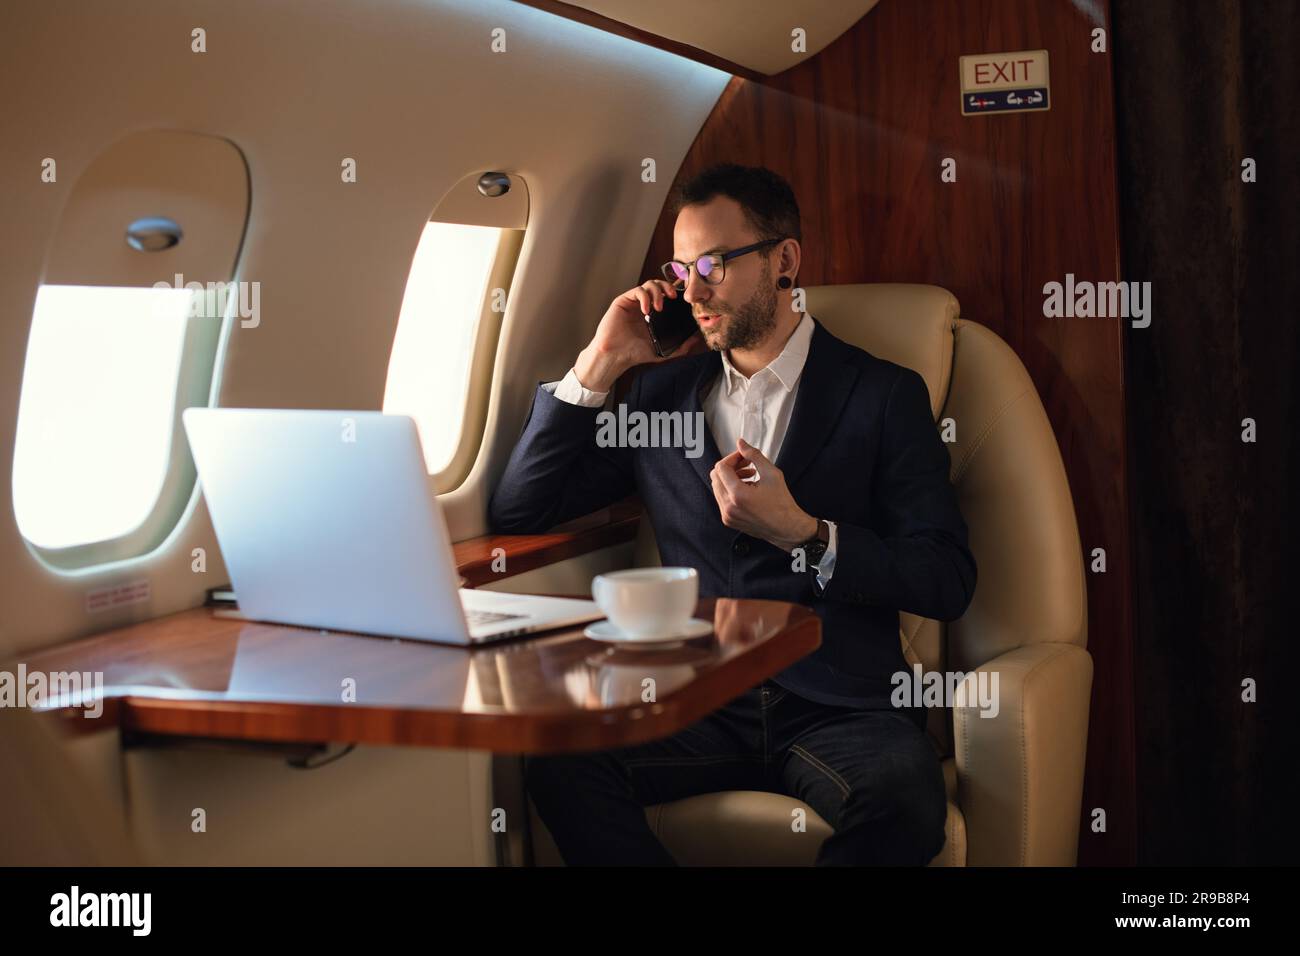 Elegant Young CEO Businessman in eyeglasses talking on a smartphone before take-off, inside a private airplane jet, Travel luxury airline concept Stock Photo